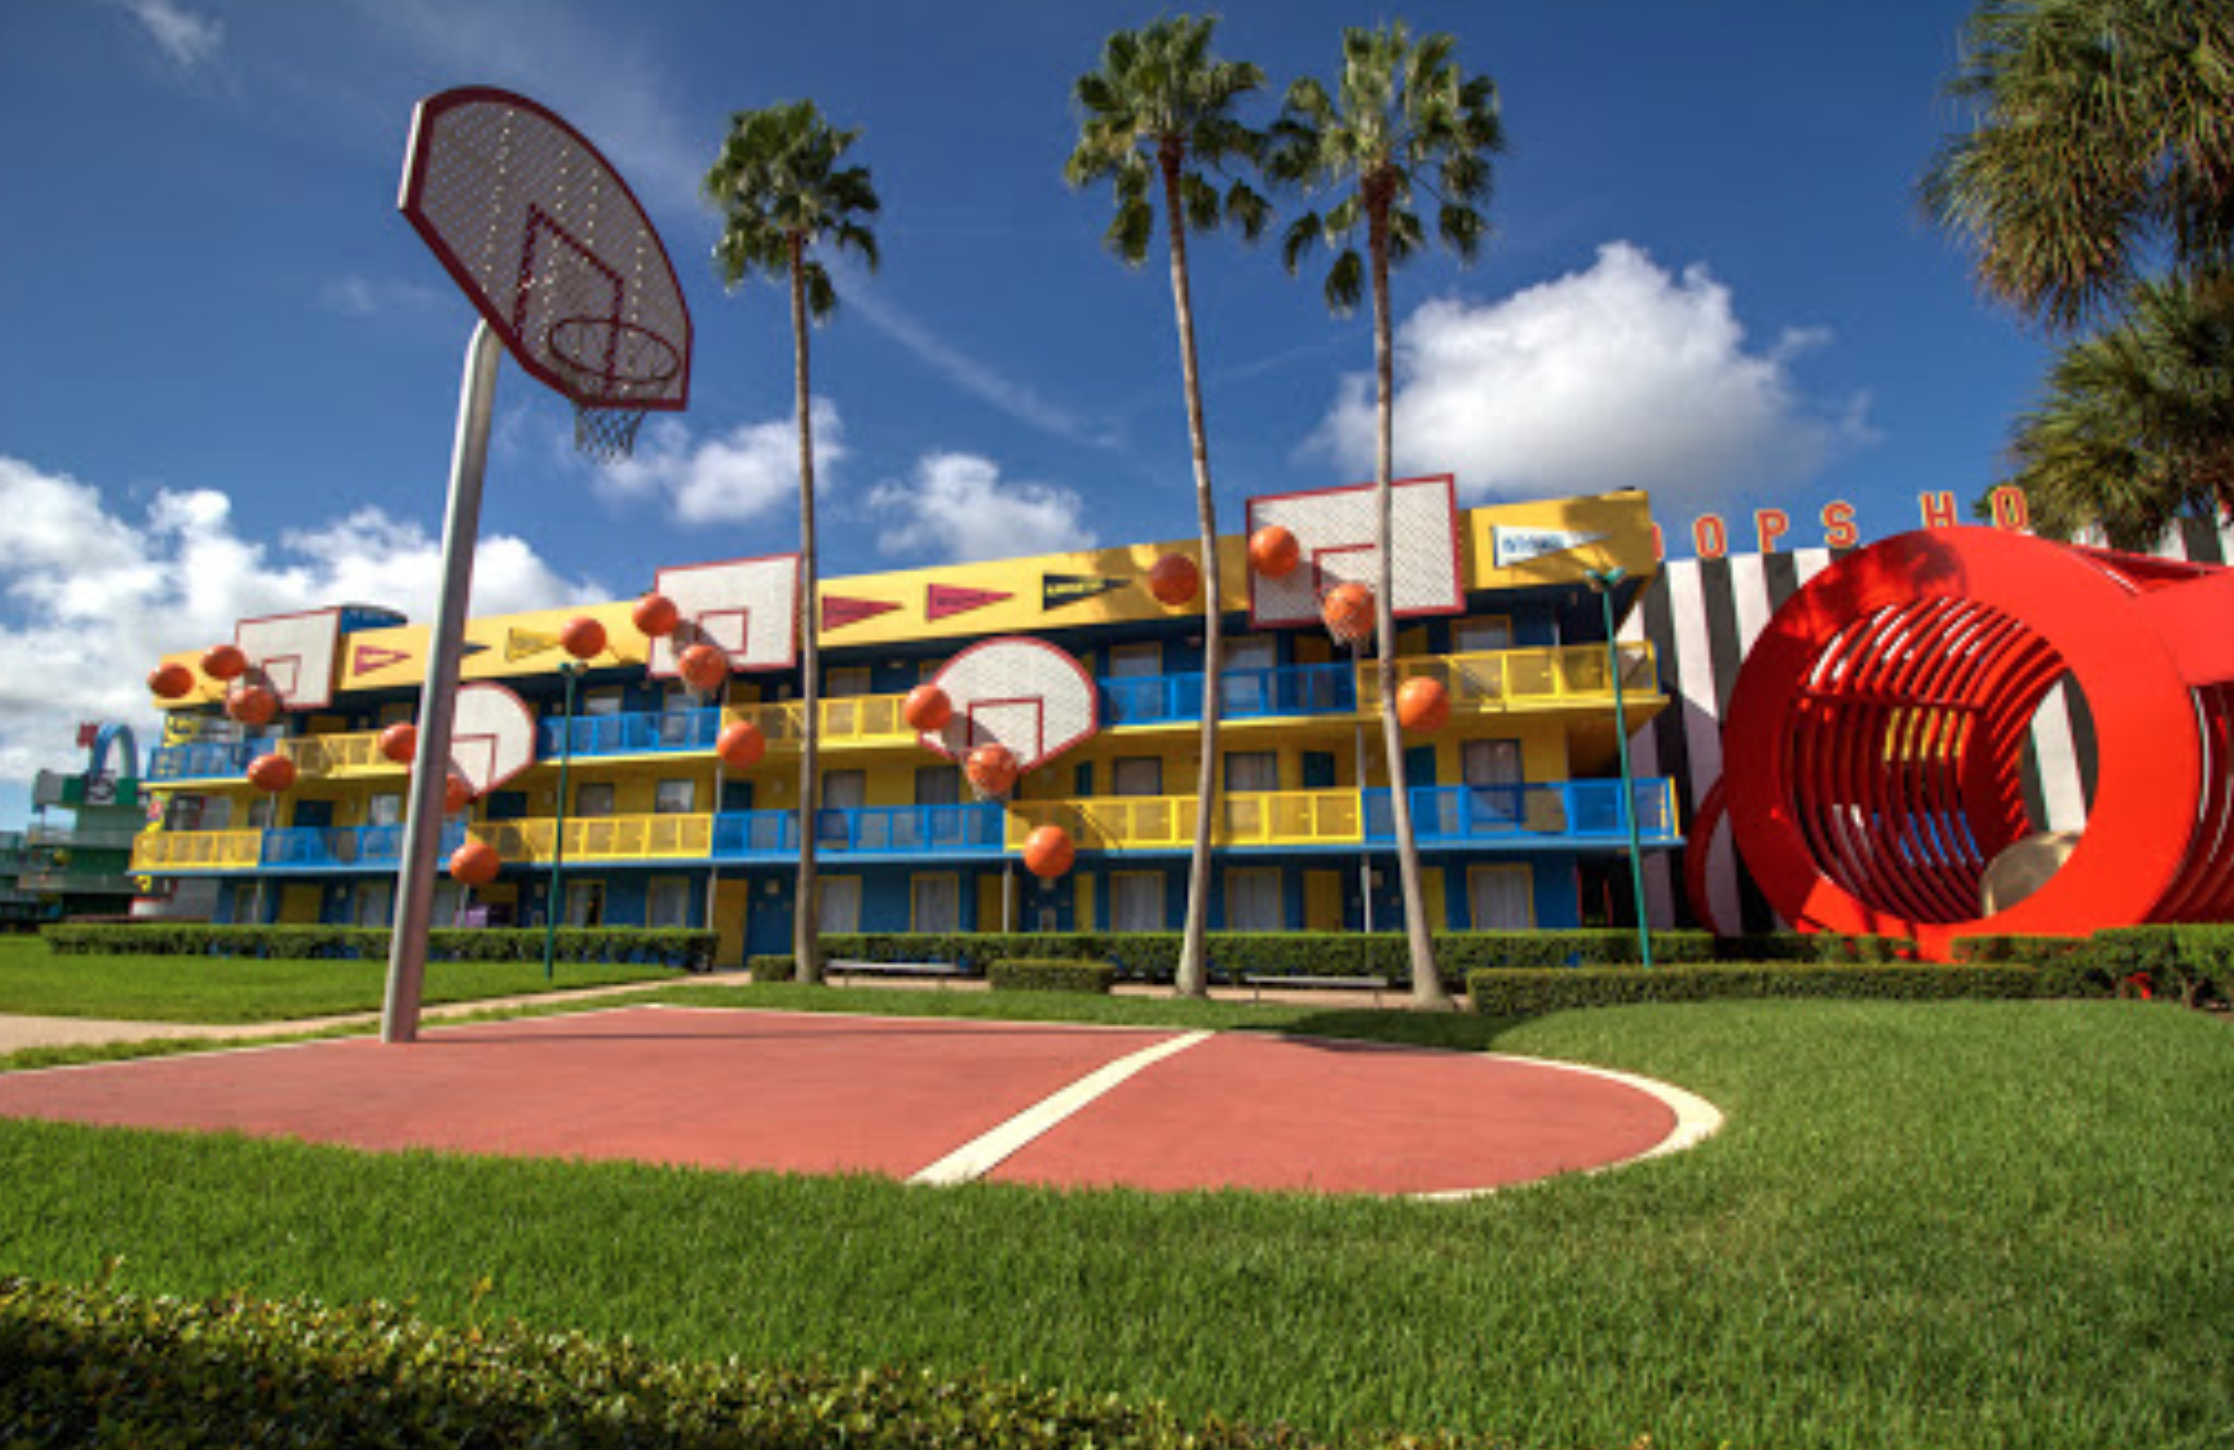 Disneys All Star Sports Resort Value Theming football tennis surfboard pool busy crowded football field turf cheerleading competitions quick service disney travel agent busy mom working mom family vacation